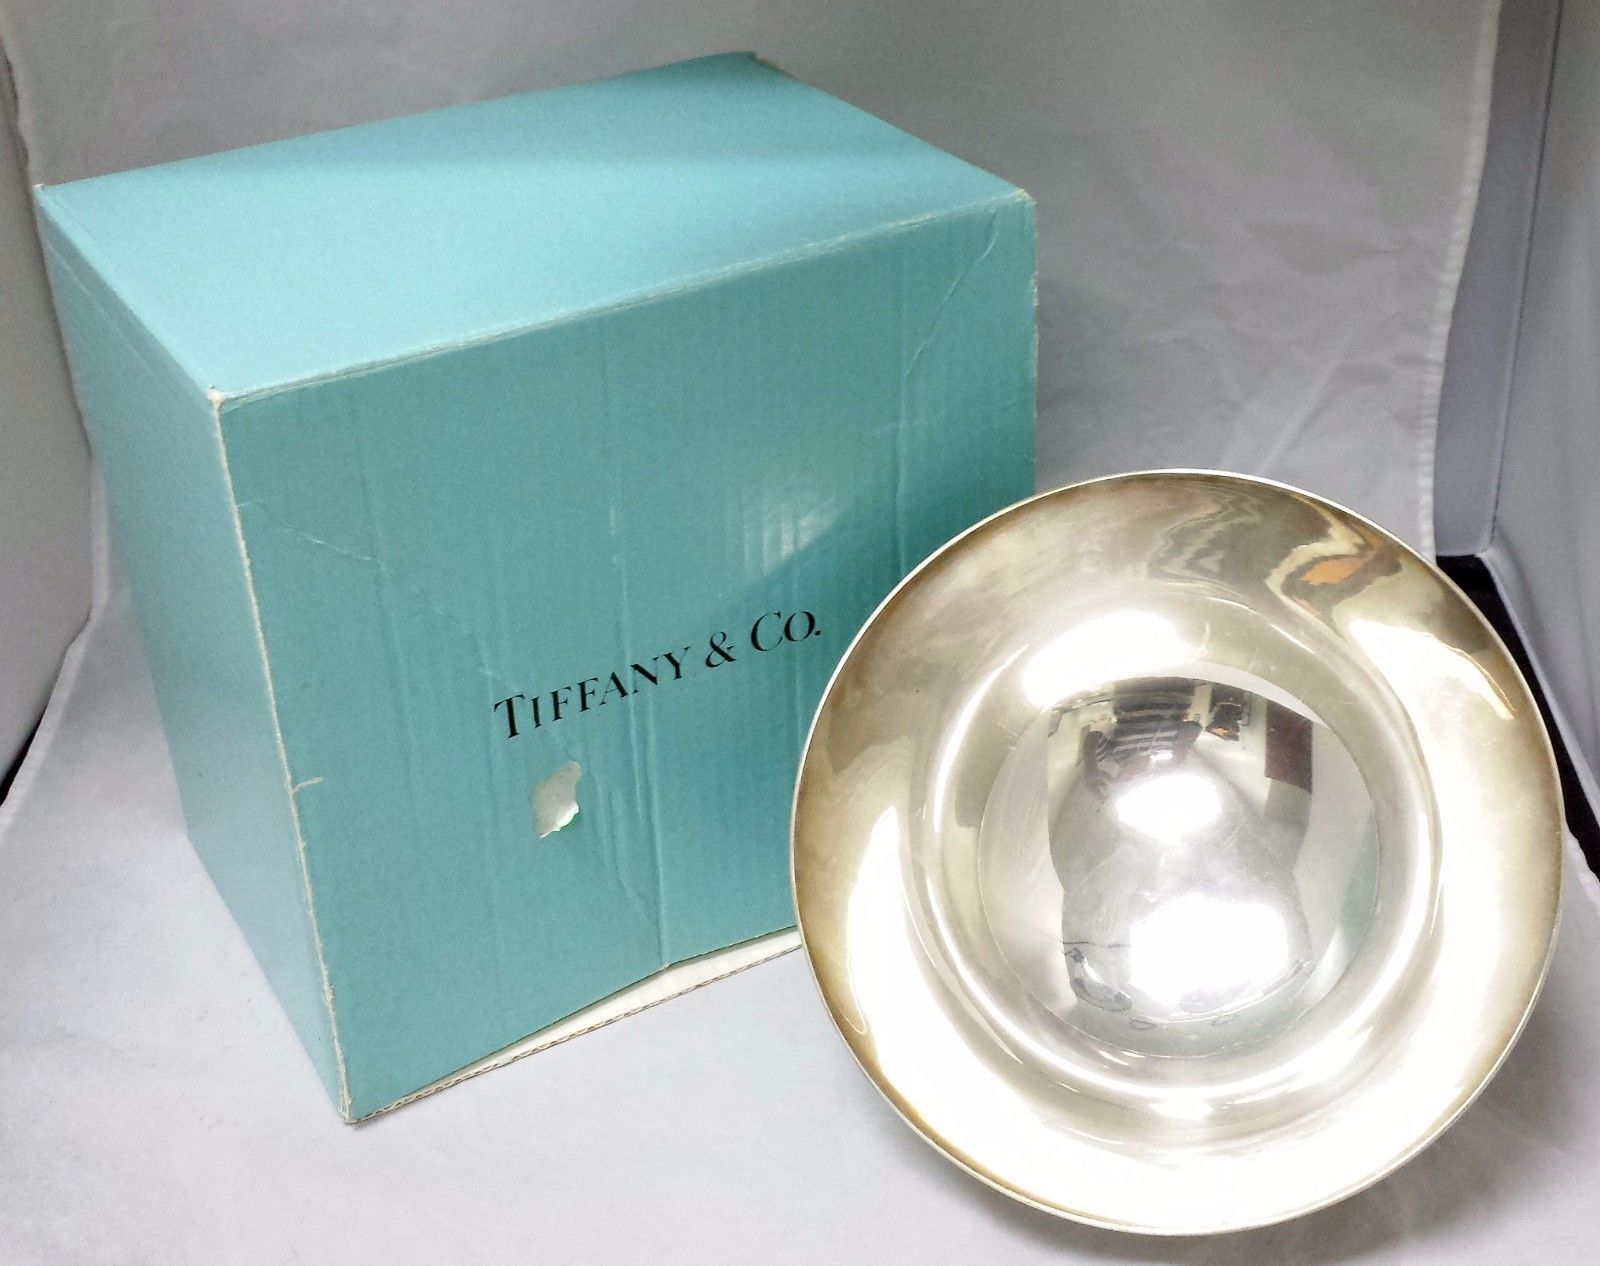 Vintage Tiffany & Co Sterling Silver Bowl #19750 Engraved Includes Original Box